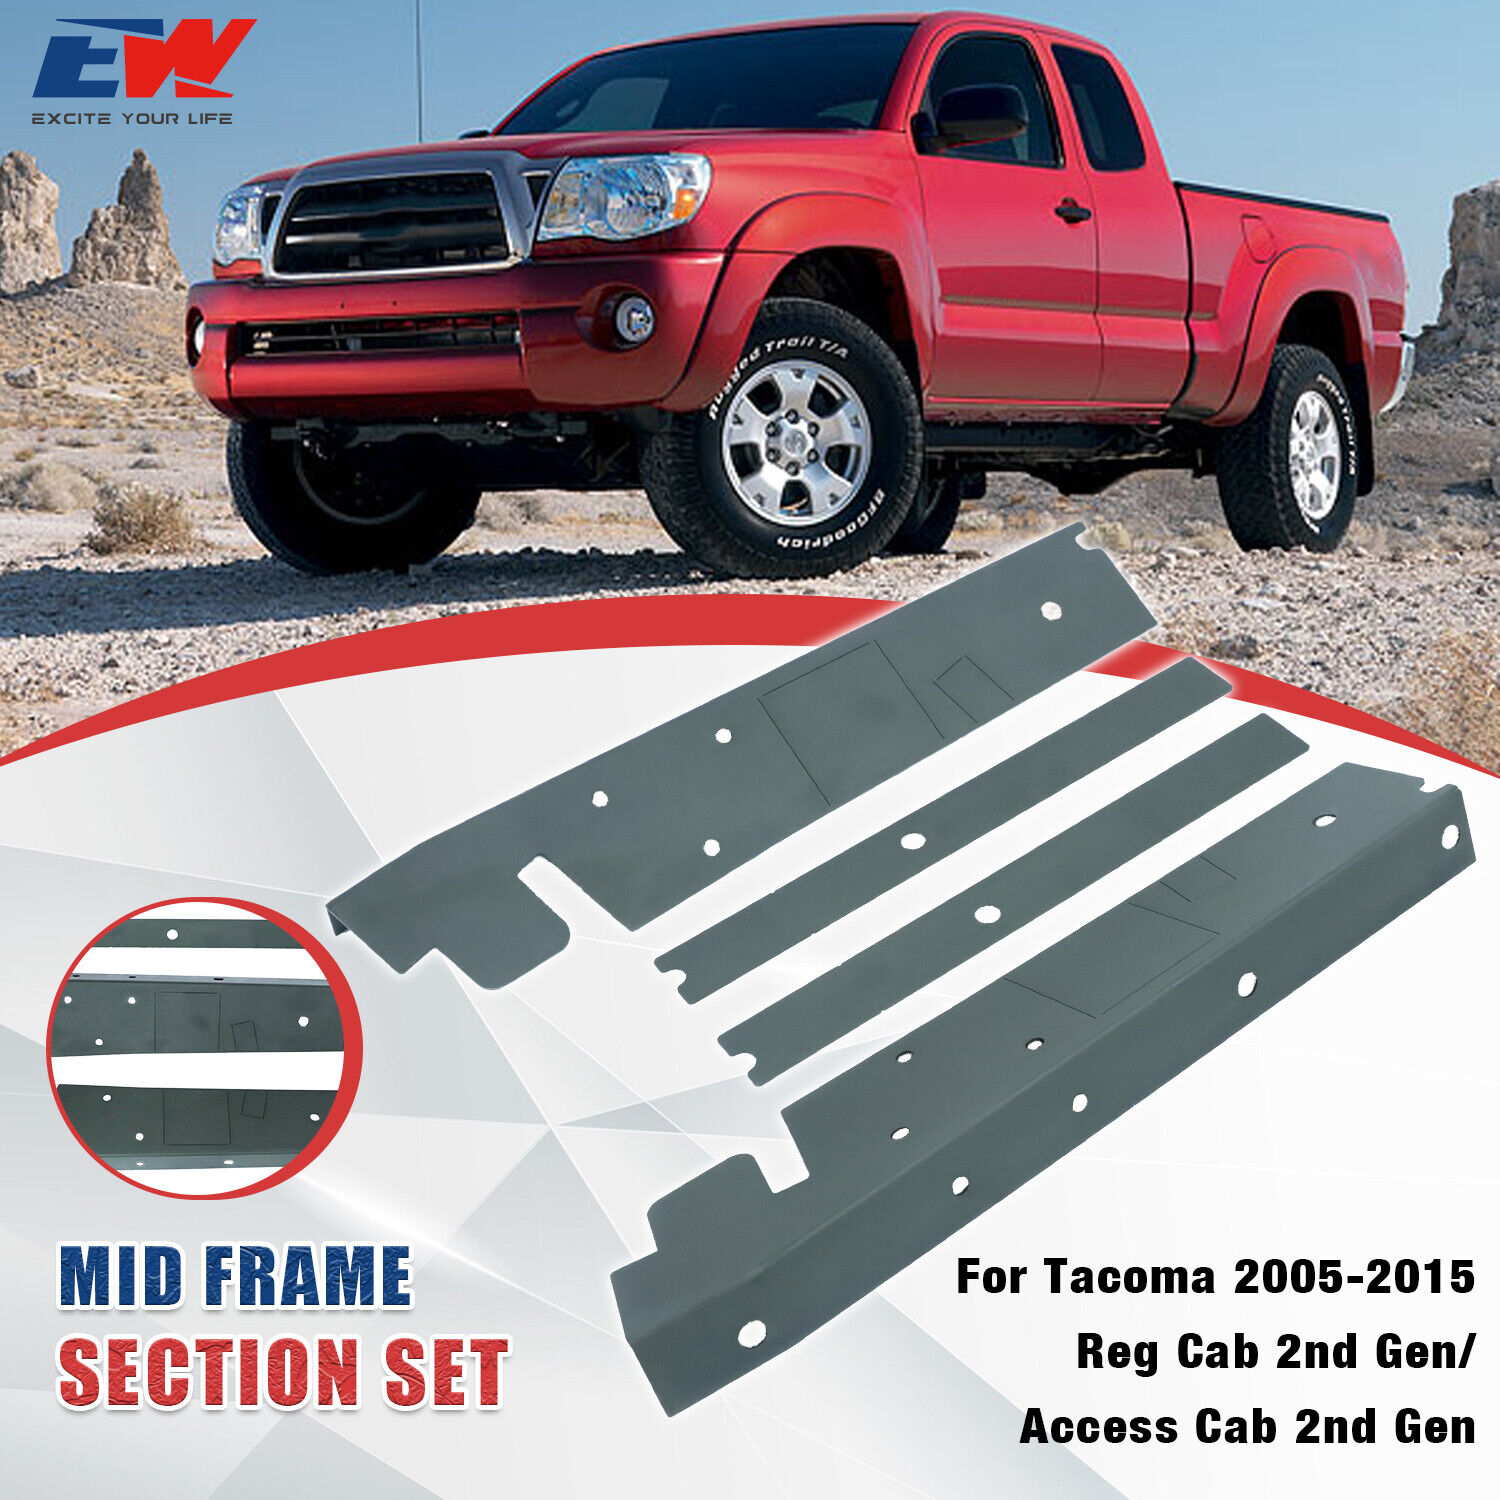 Mid Frame Section for Tacoma 2005-2015 Reg Cab 2nd Gen/Access Cab 2nd Gen NEW